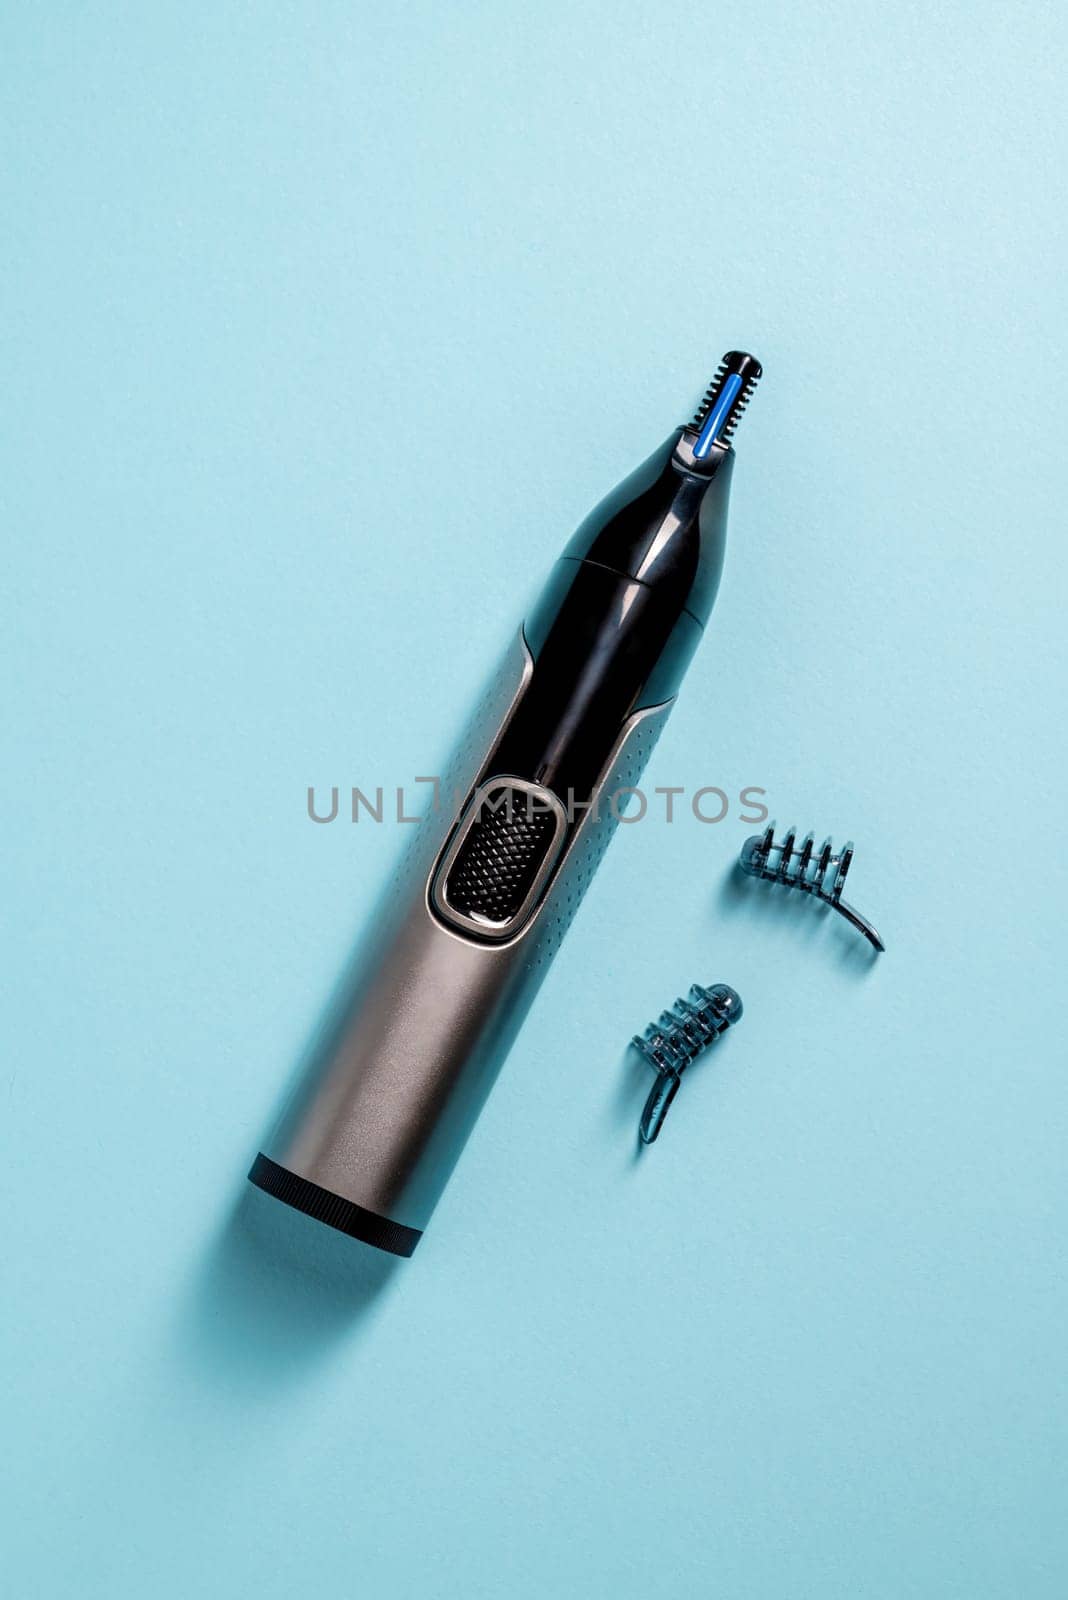 Top view of nose and ear hair trimmer isolated on blue background